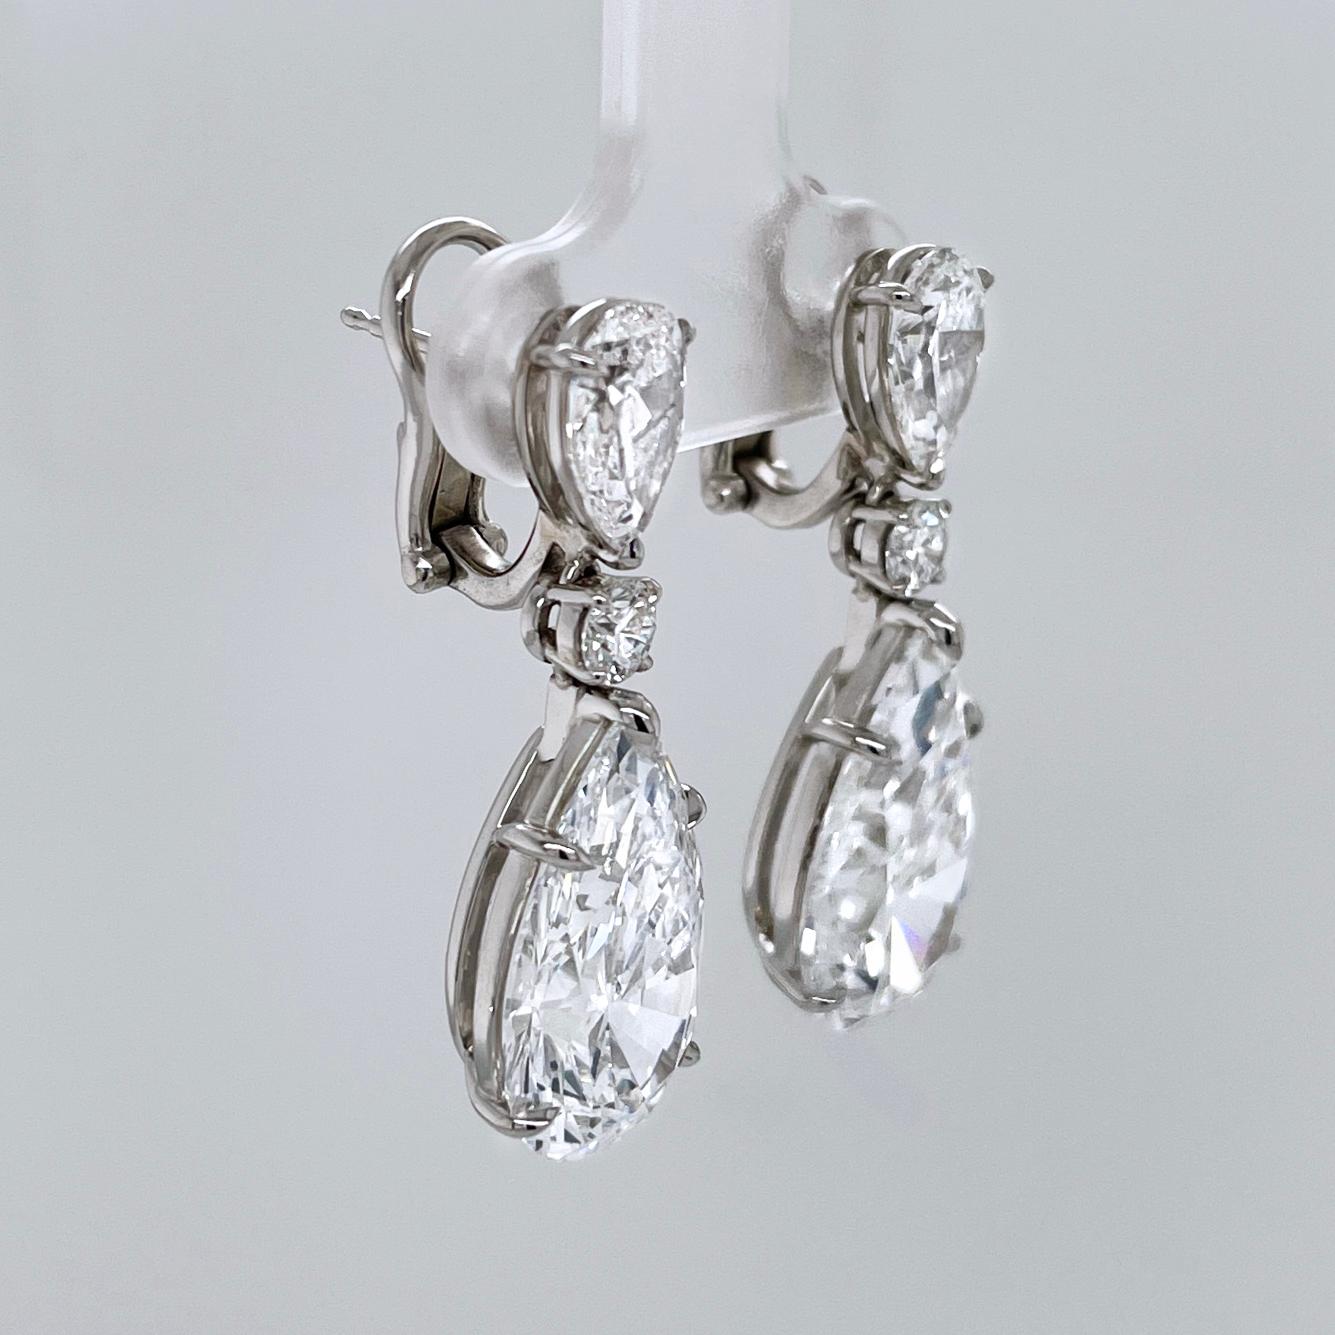 Contemporary 5.85 PS D IF & 6.43 PS D IF Earrings GIA Certified For Sale